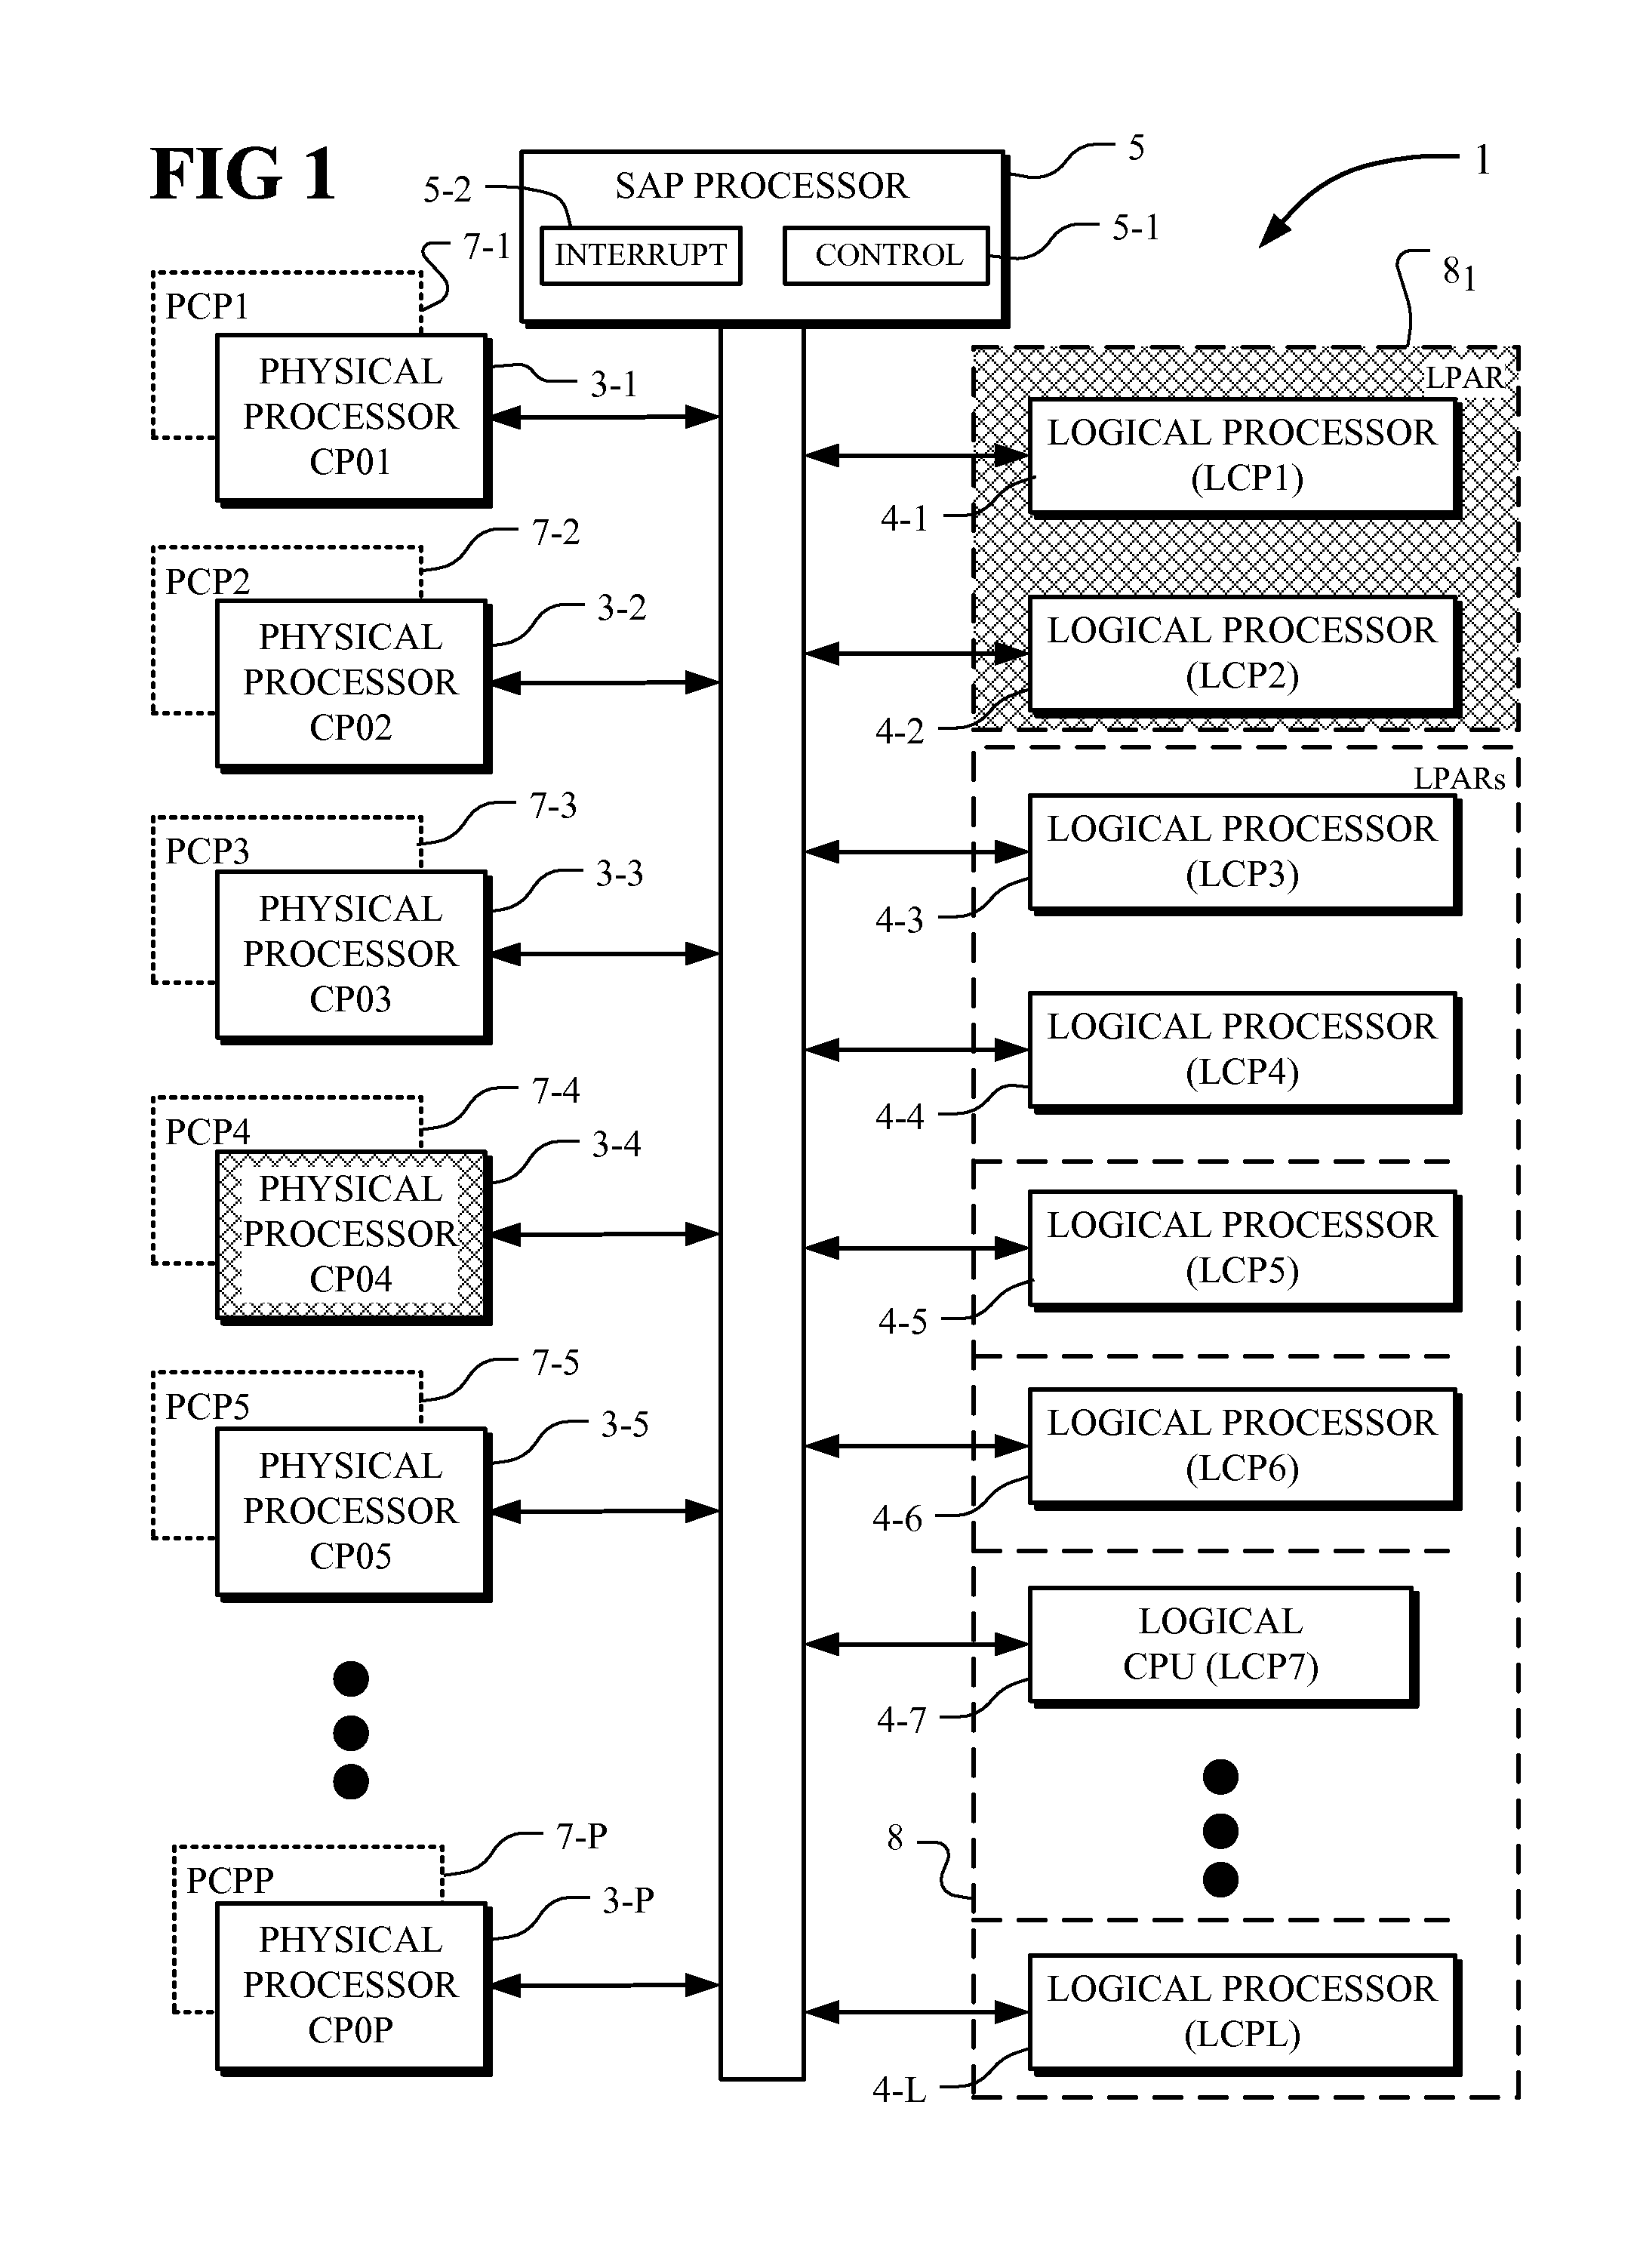 Processor exclusivity in a partitioned system